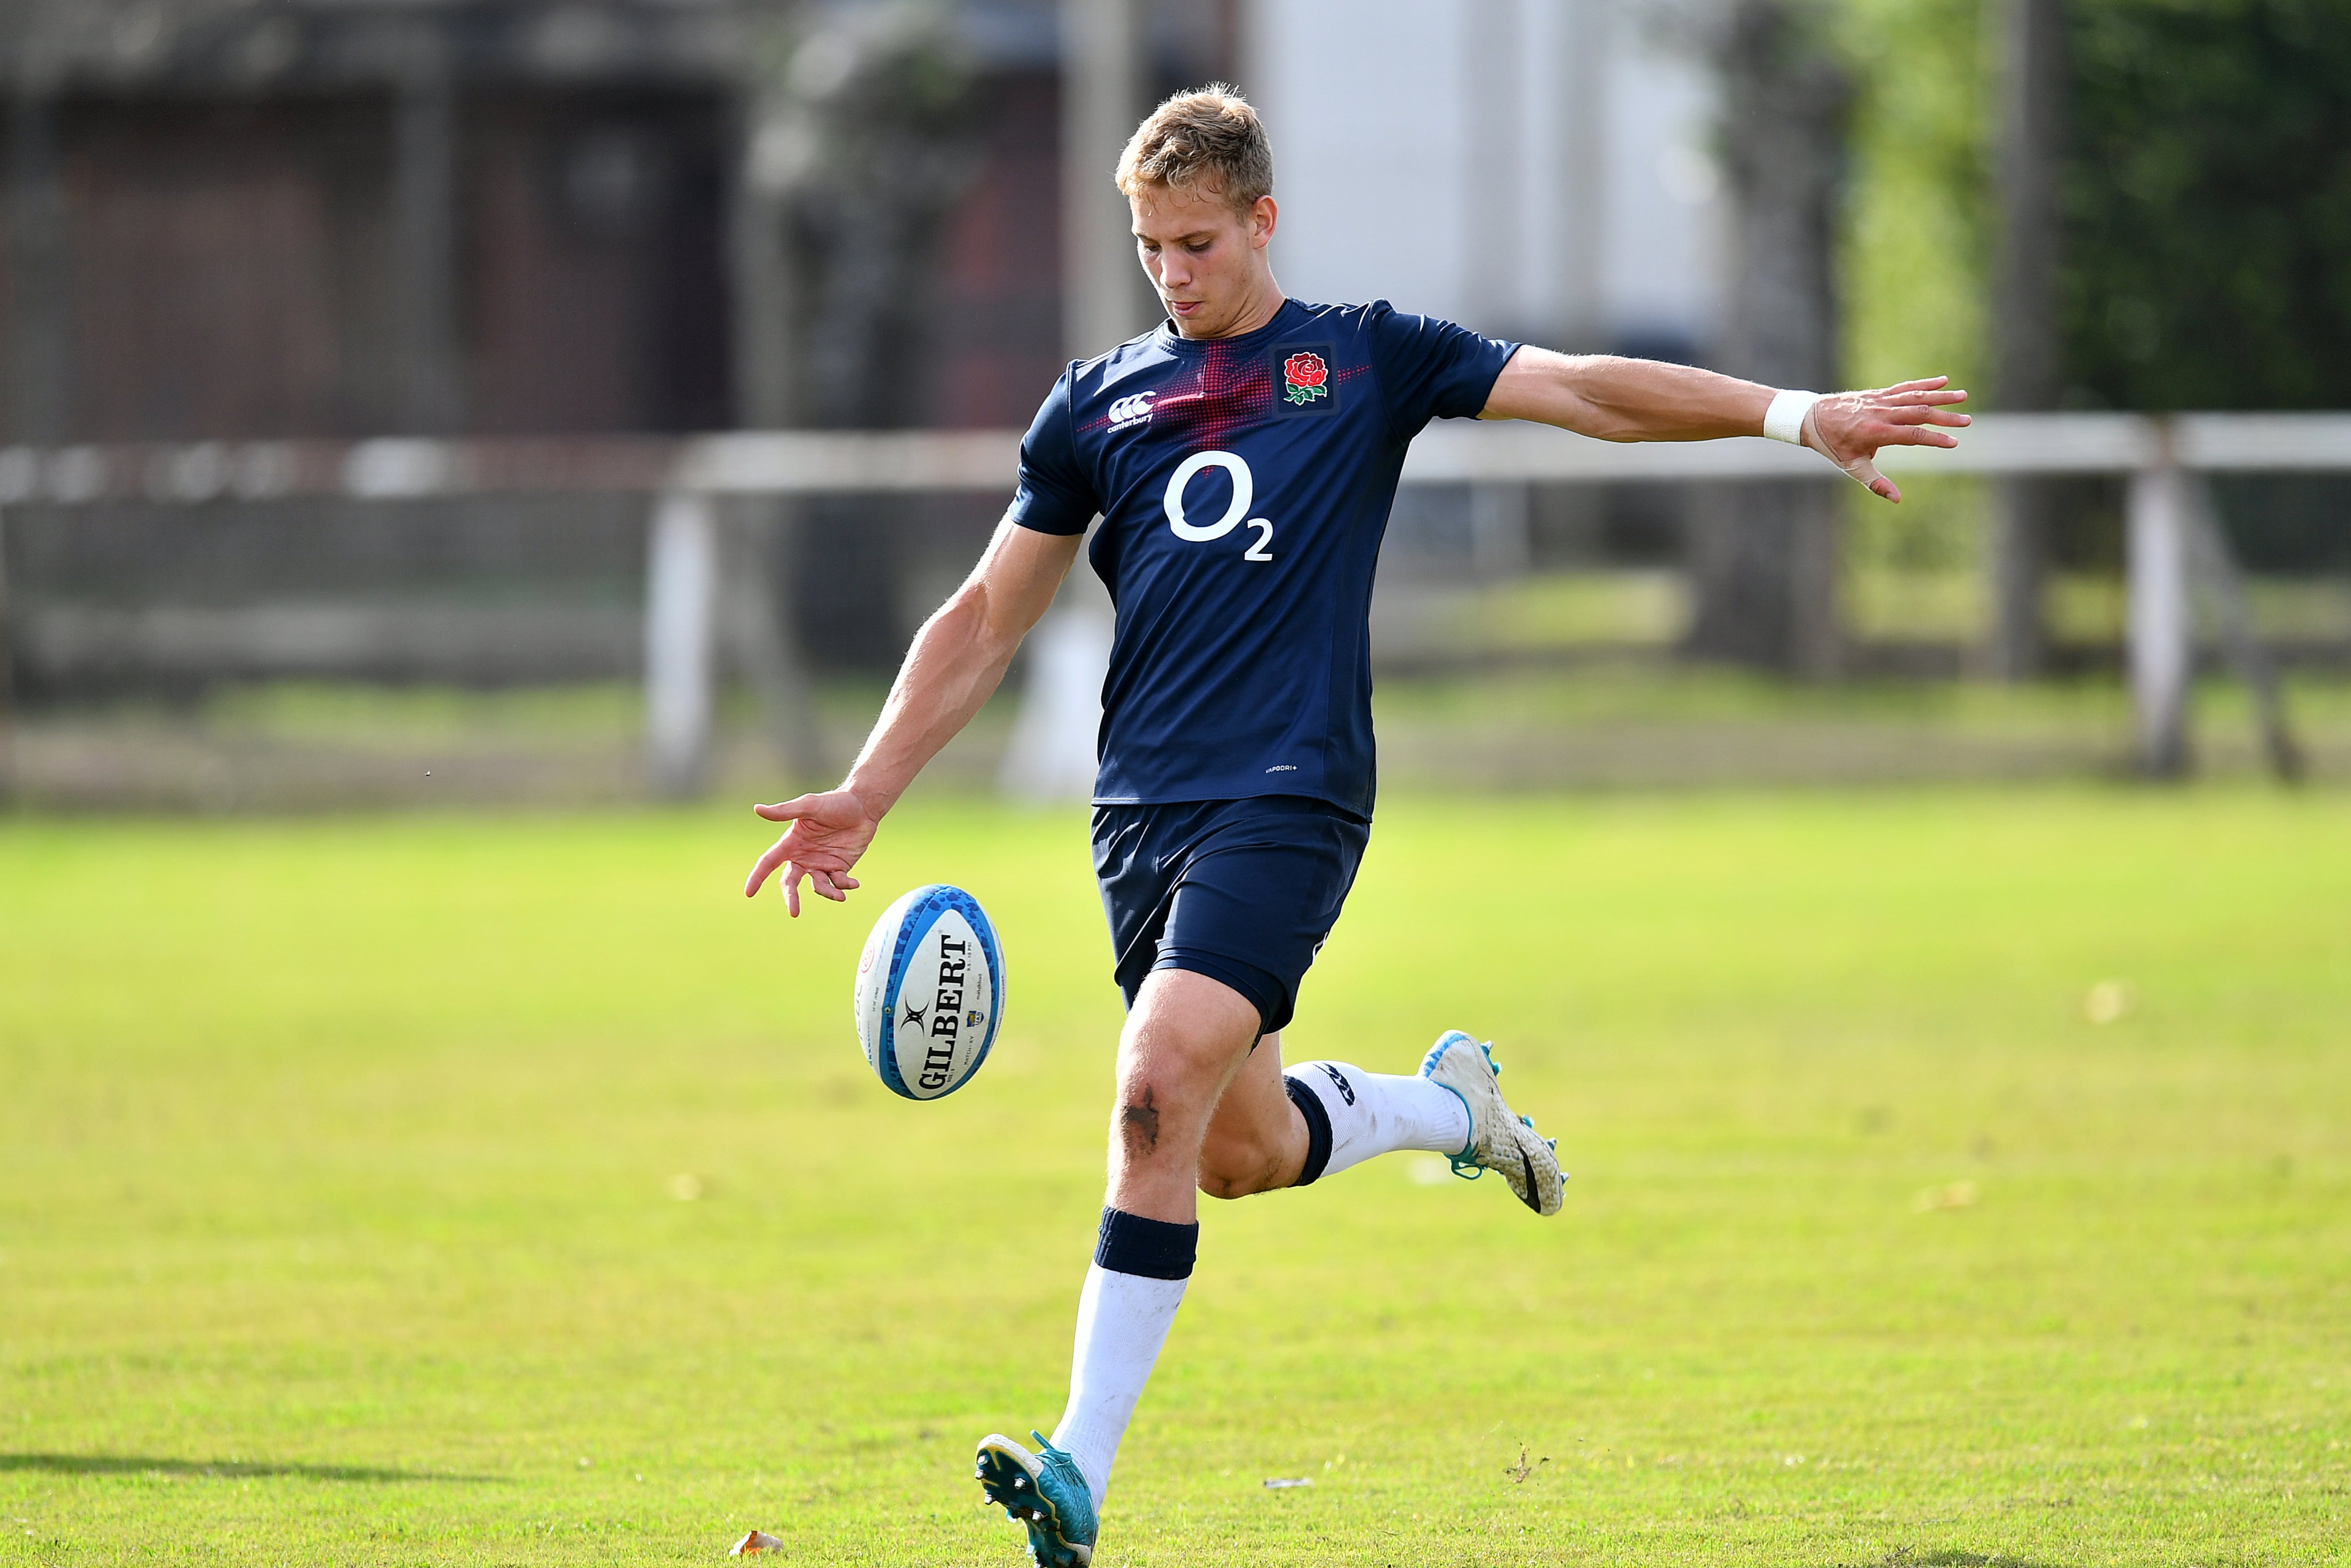 Mallinder spent time in Eddie Jones’s England squad in 2017 and 2018